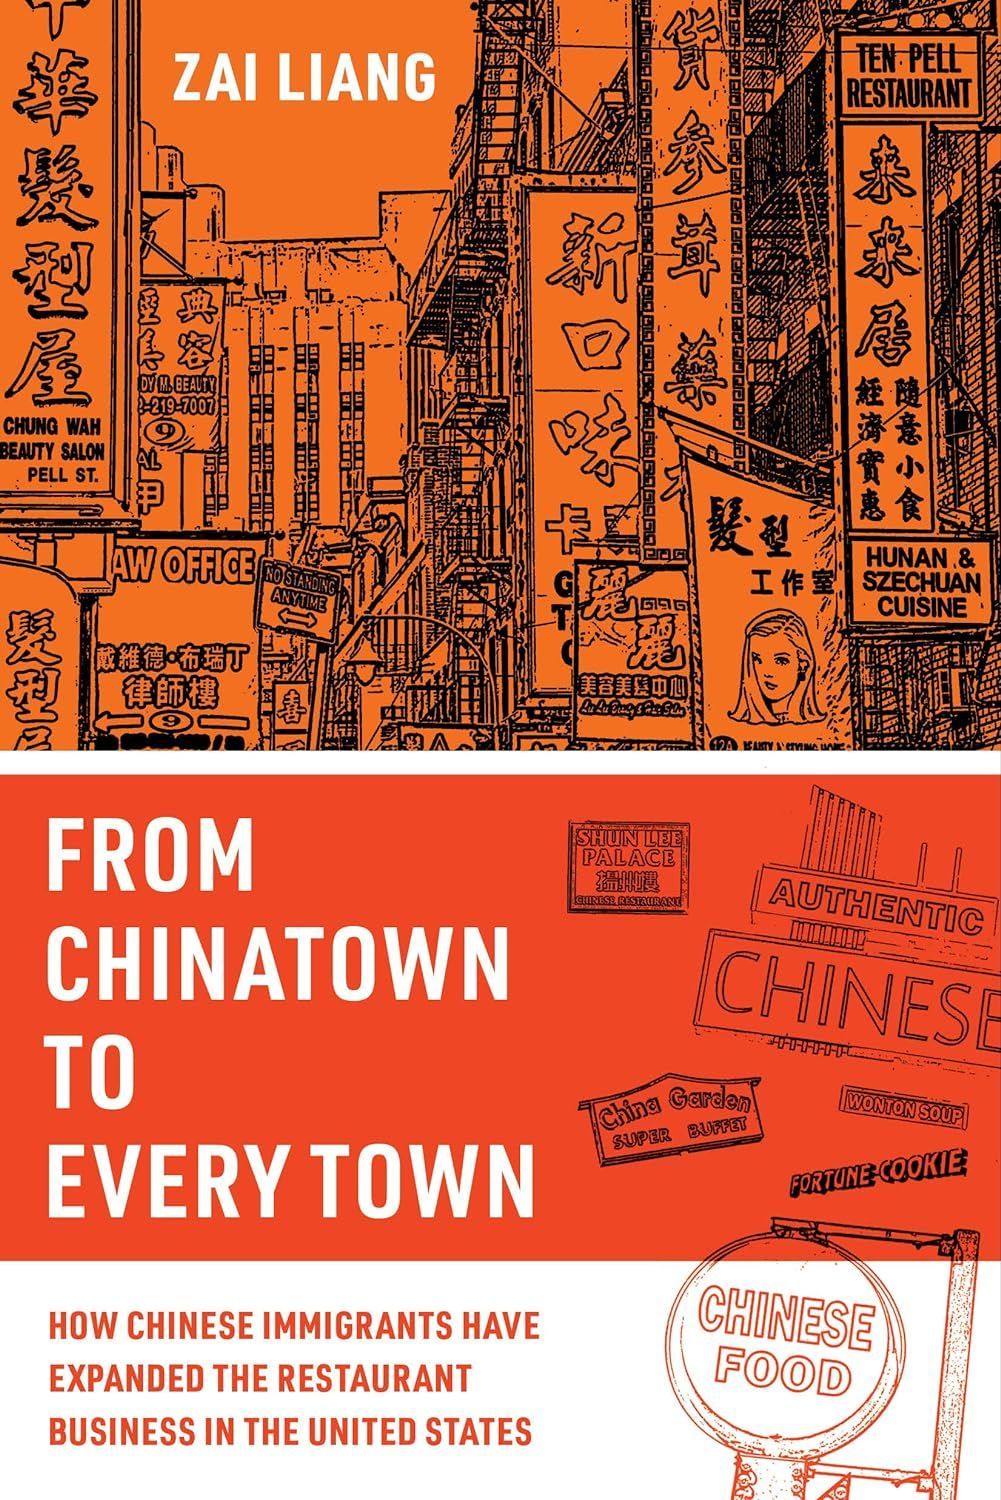 The Chinese Restaurant on Main Street, USA: On Zai Liang’s “From Chinatown to Every Town”